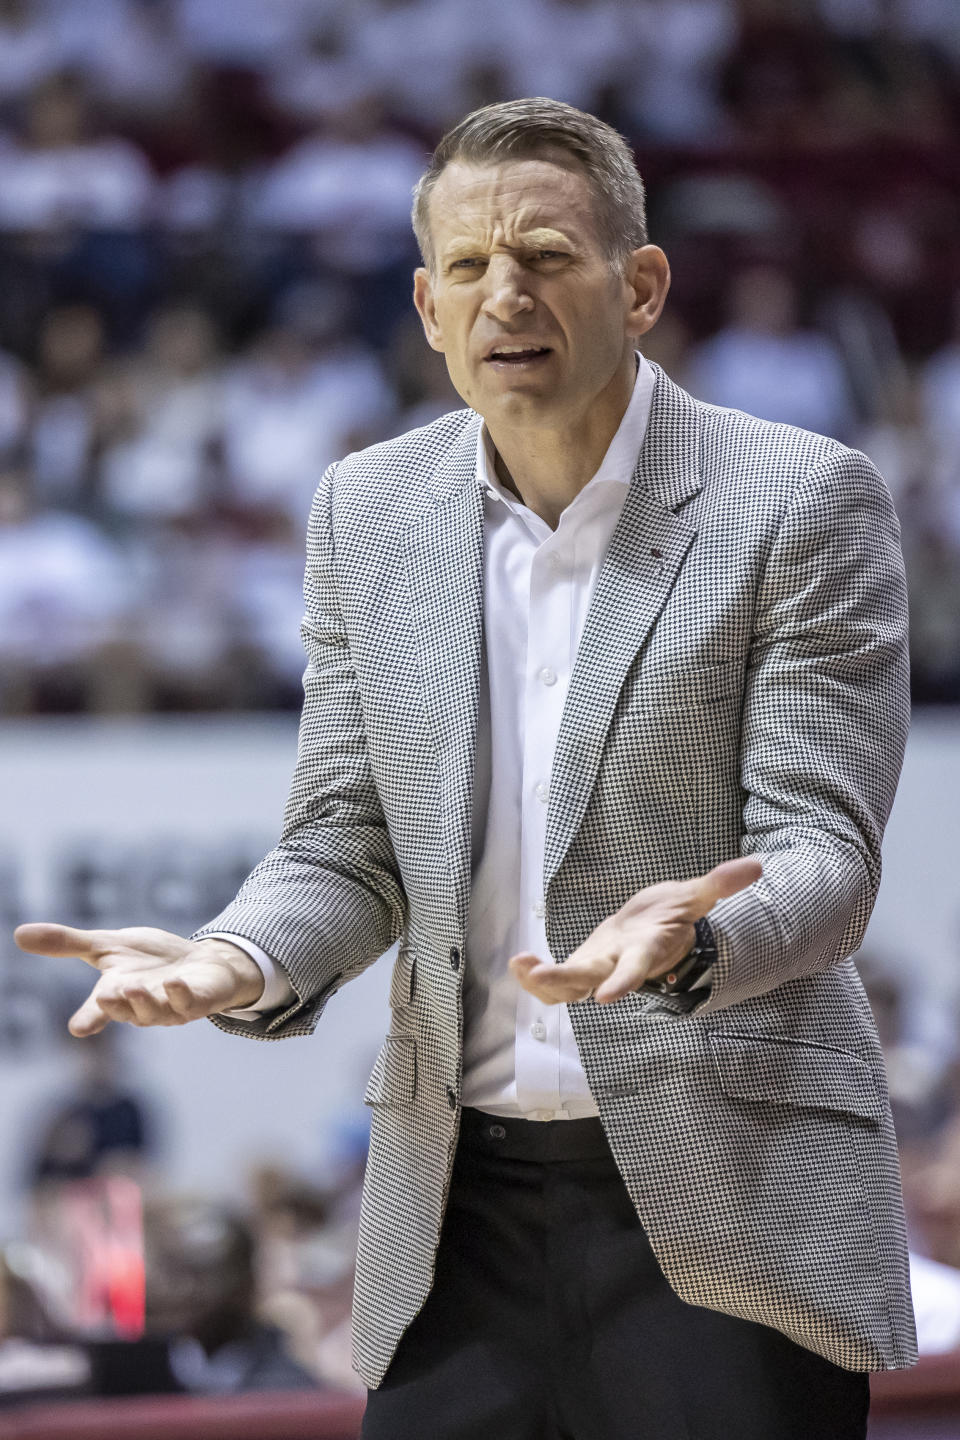 Alabama head coach Nate Oats reacts to call during the first half of an NCAA college basketball game against Arkansas, Saturday, Feb. 25, 2023, in Tuscaloosa, Ala. (AP Photo/Vasha Hunt)